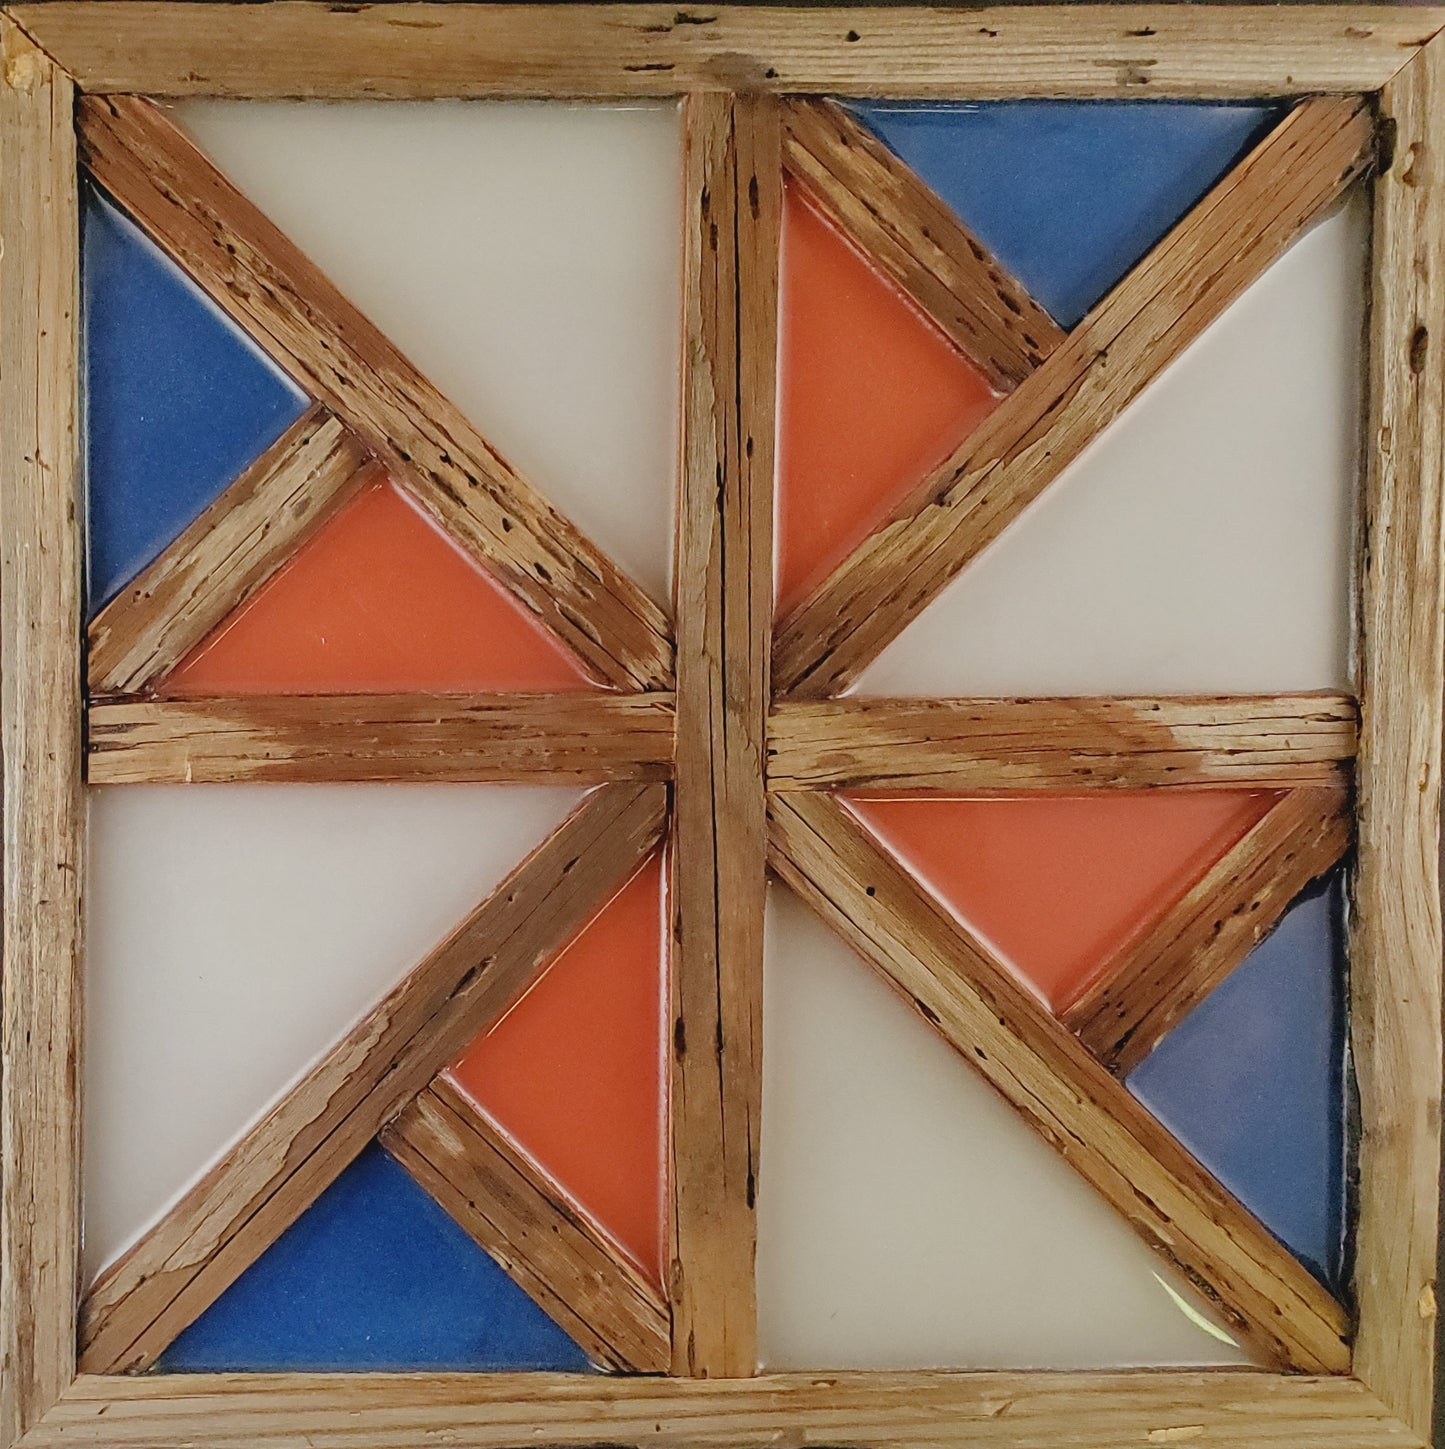 USA Barn quilt square